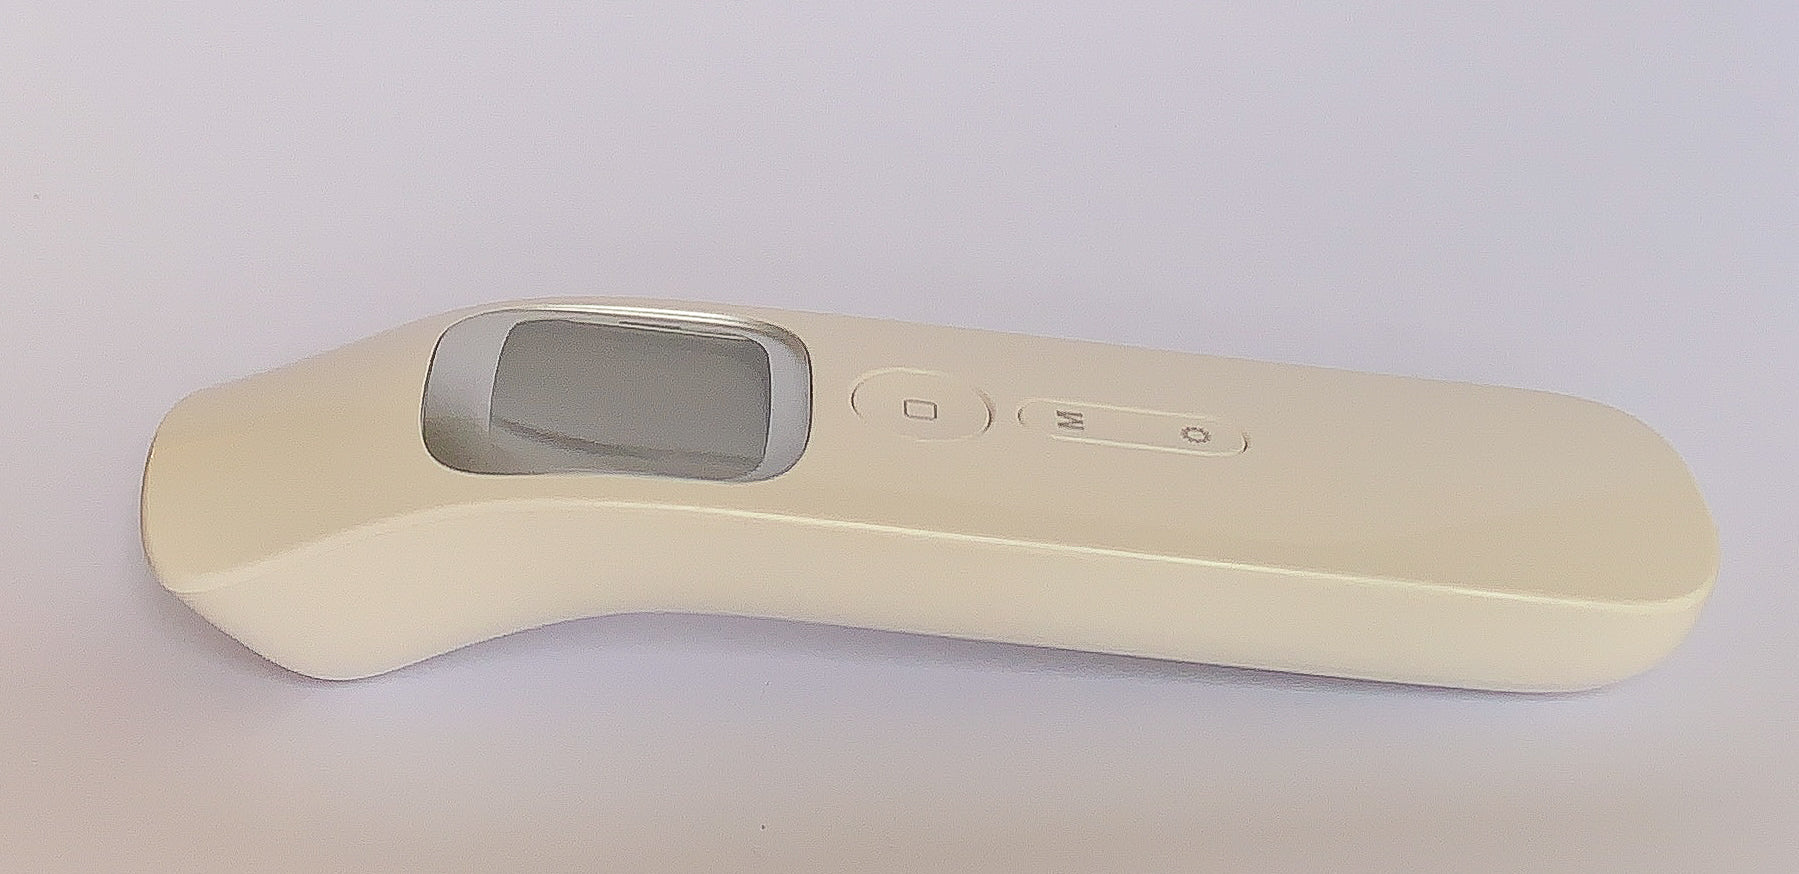 The Best Forehead Thermometer 2020